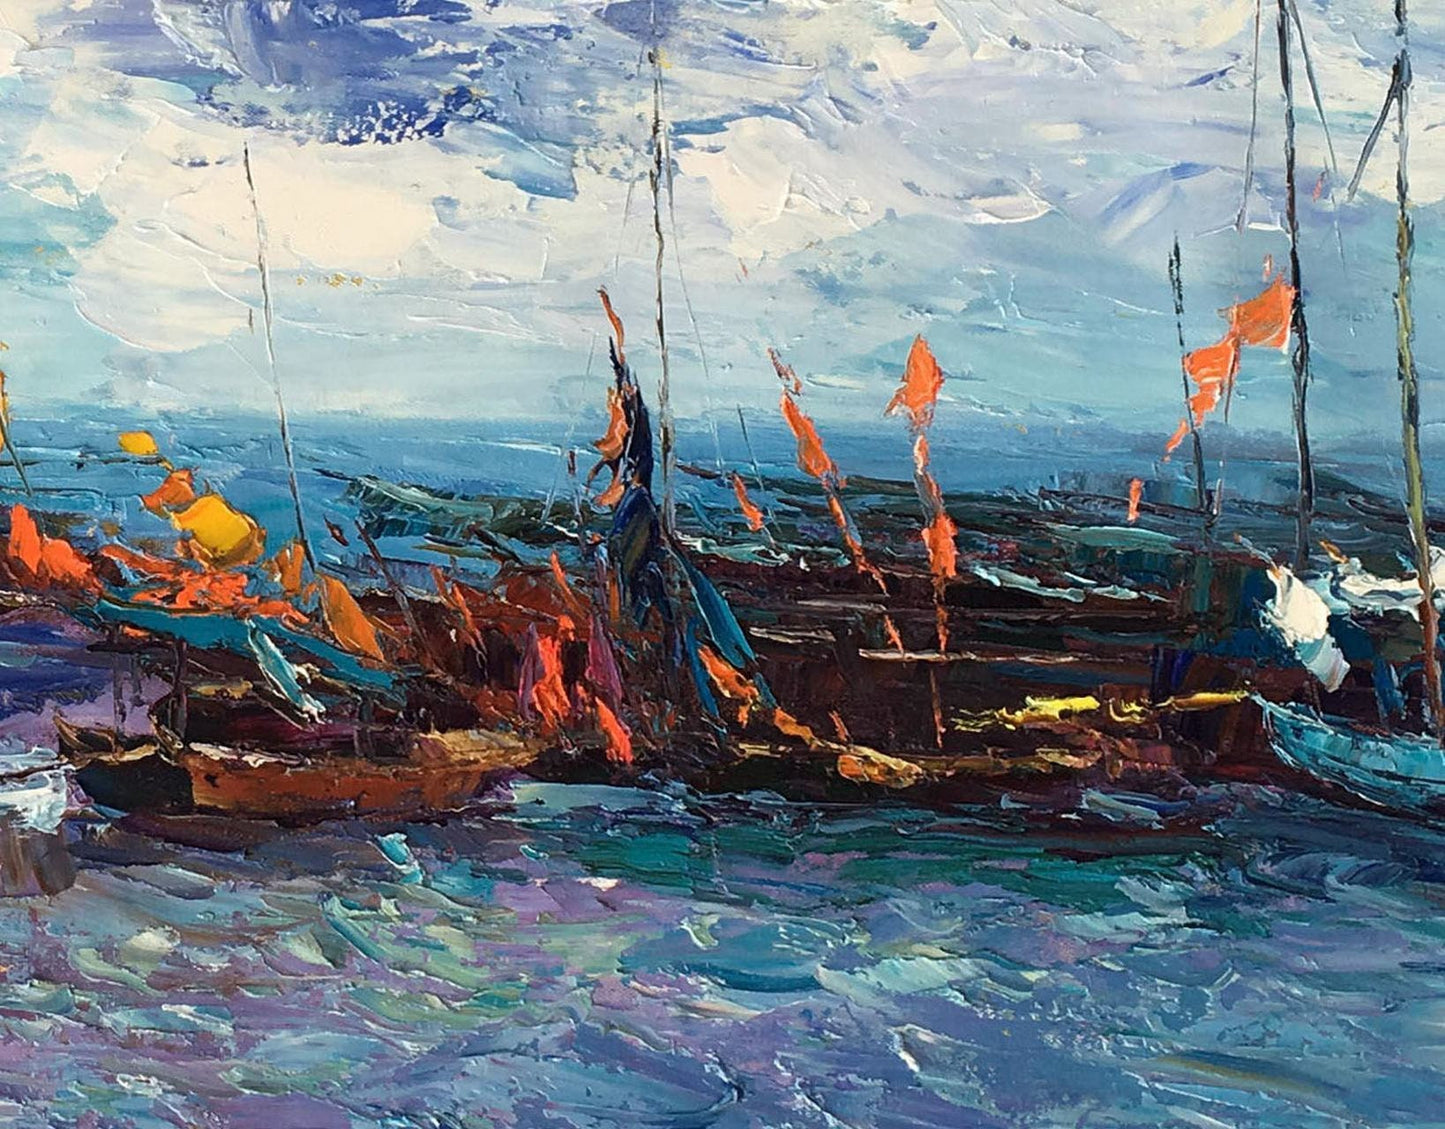 Palette Knife Fishing Boats Seascape | Handmade Oil Painting | Contemporary Canvas Art | 32x48 Inches | Ready to Ship